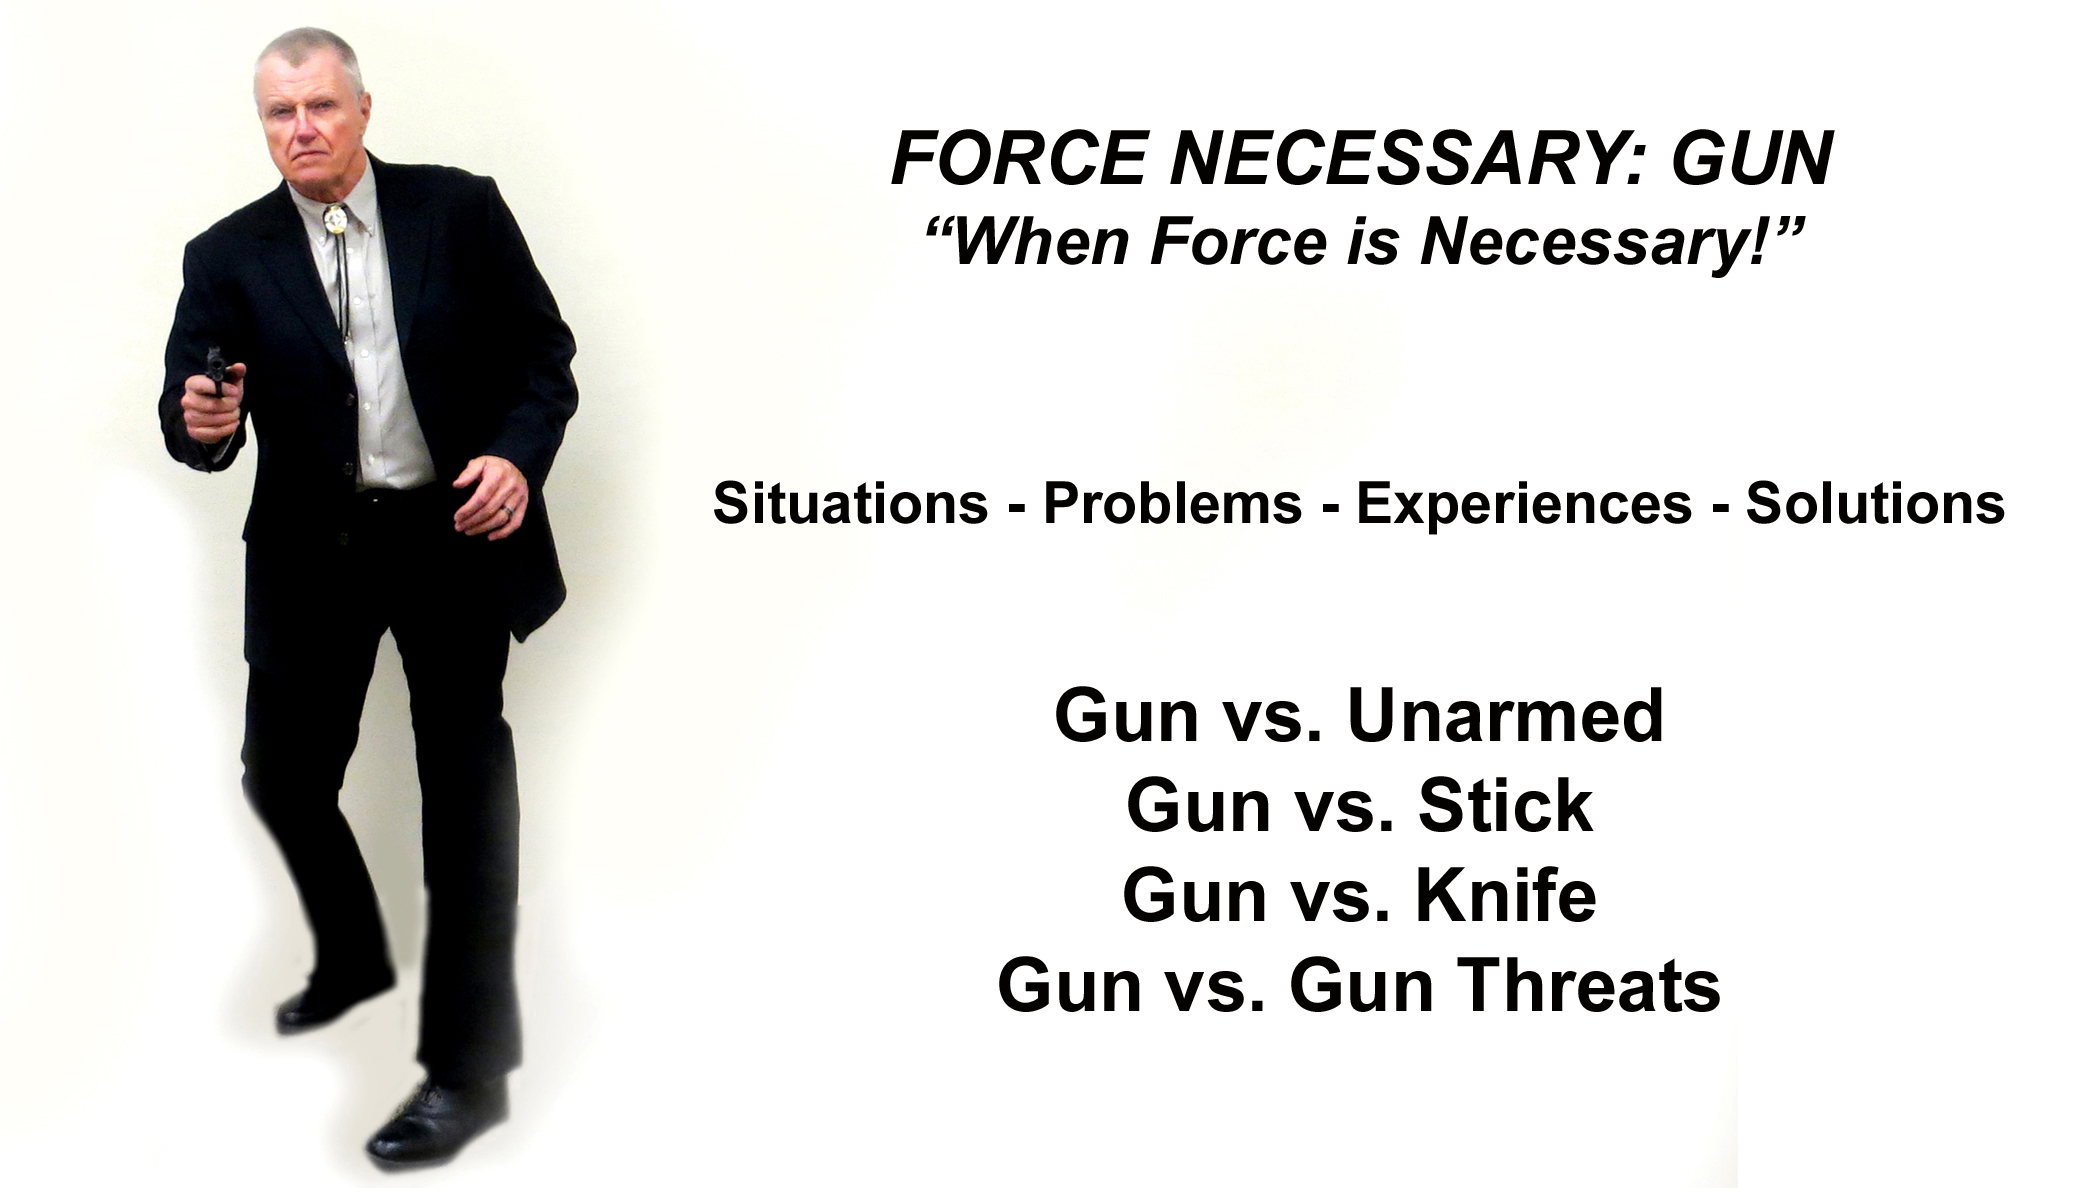 The Quandary of Training Stick vs. Stick, versus Combatives - Force  Necessary: Hock's Hand, Stick, Knife and Gun Combatives